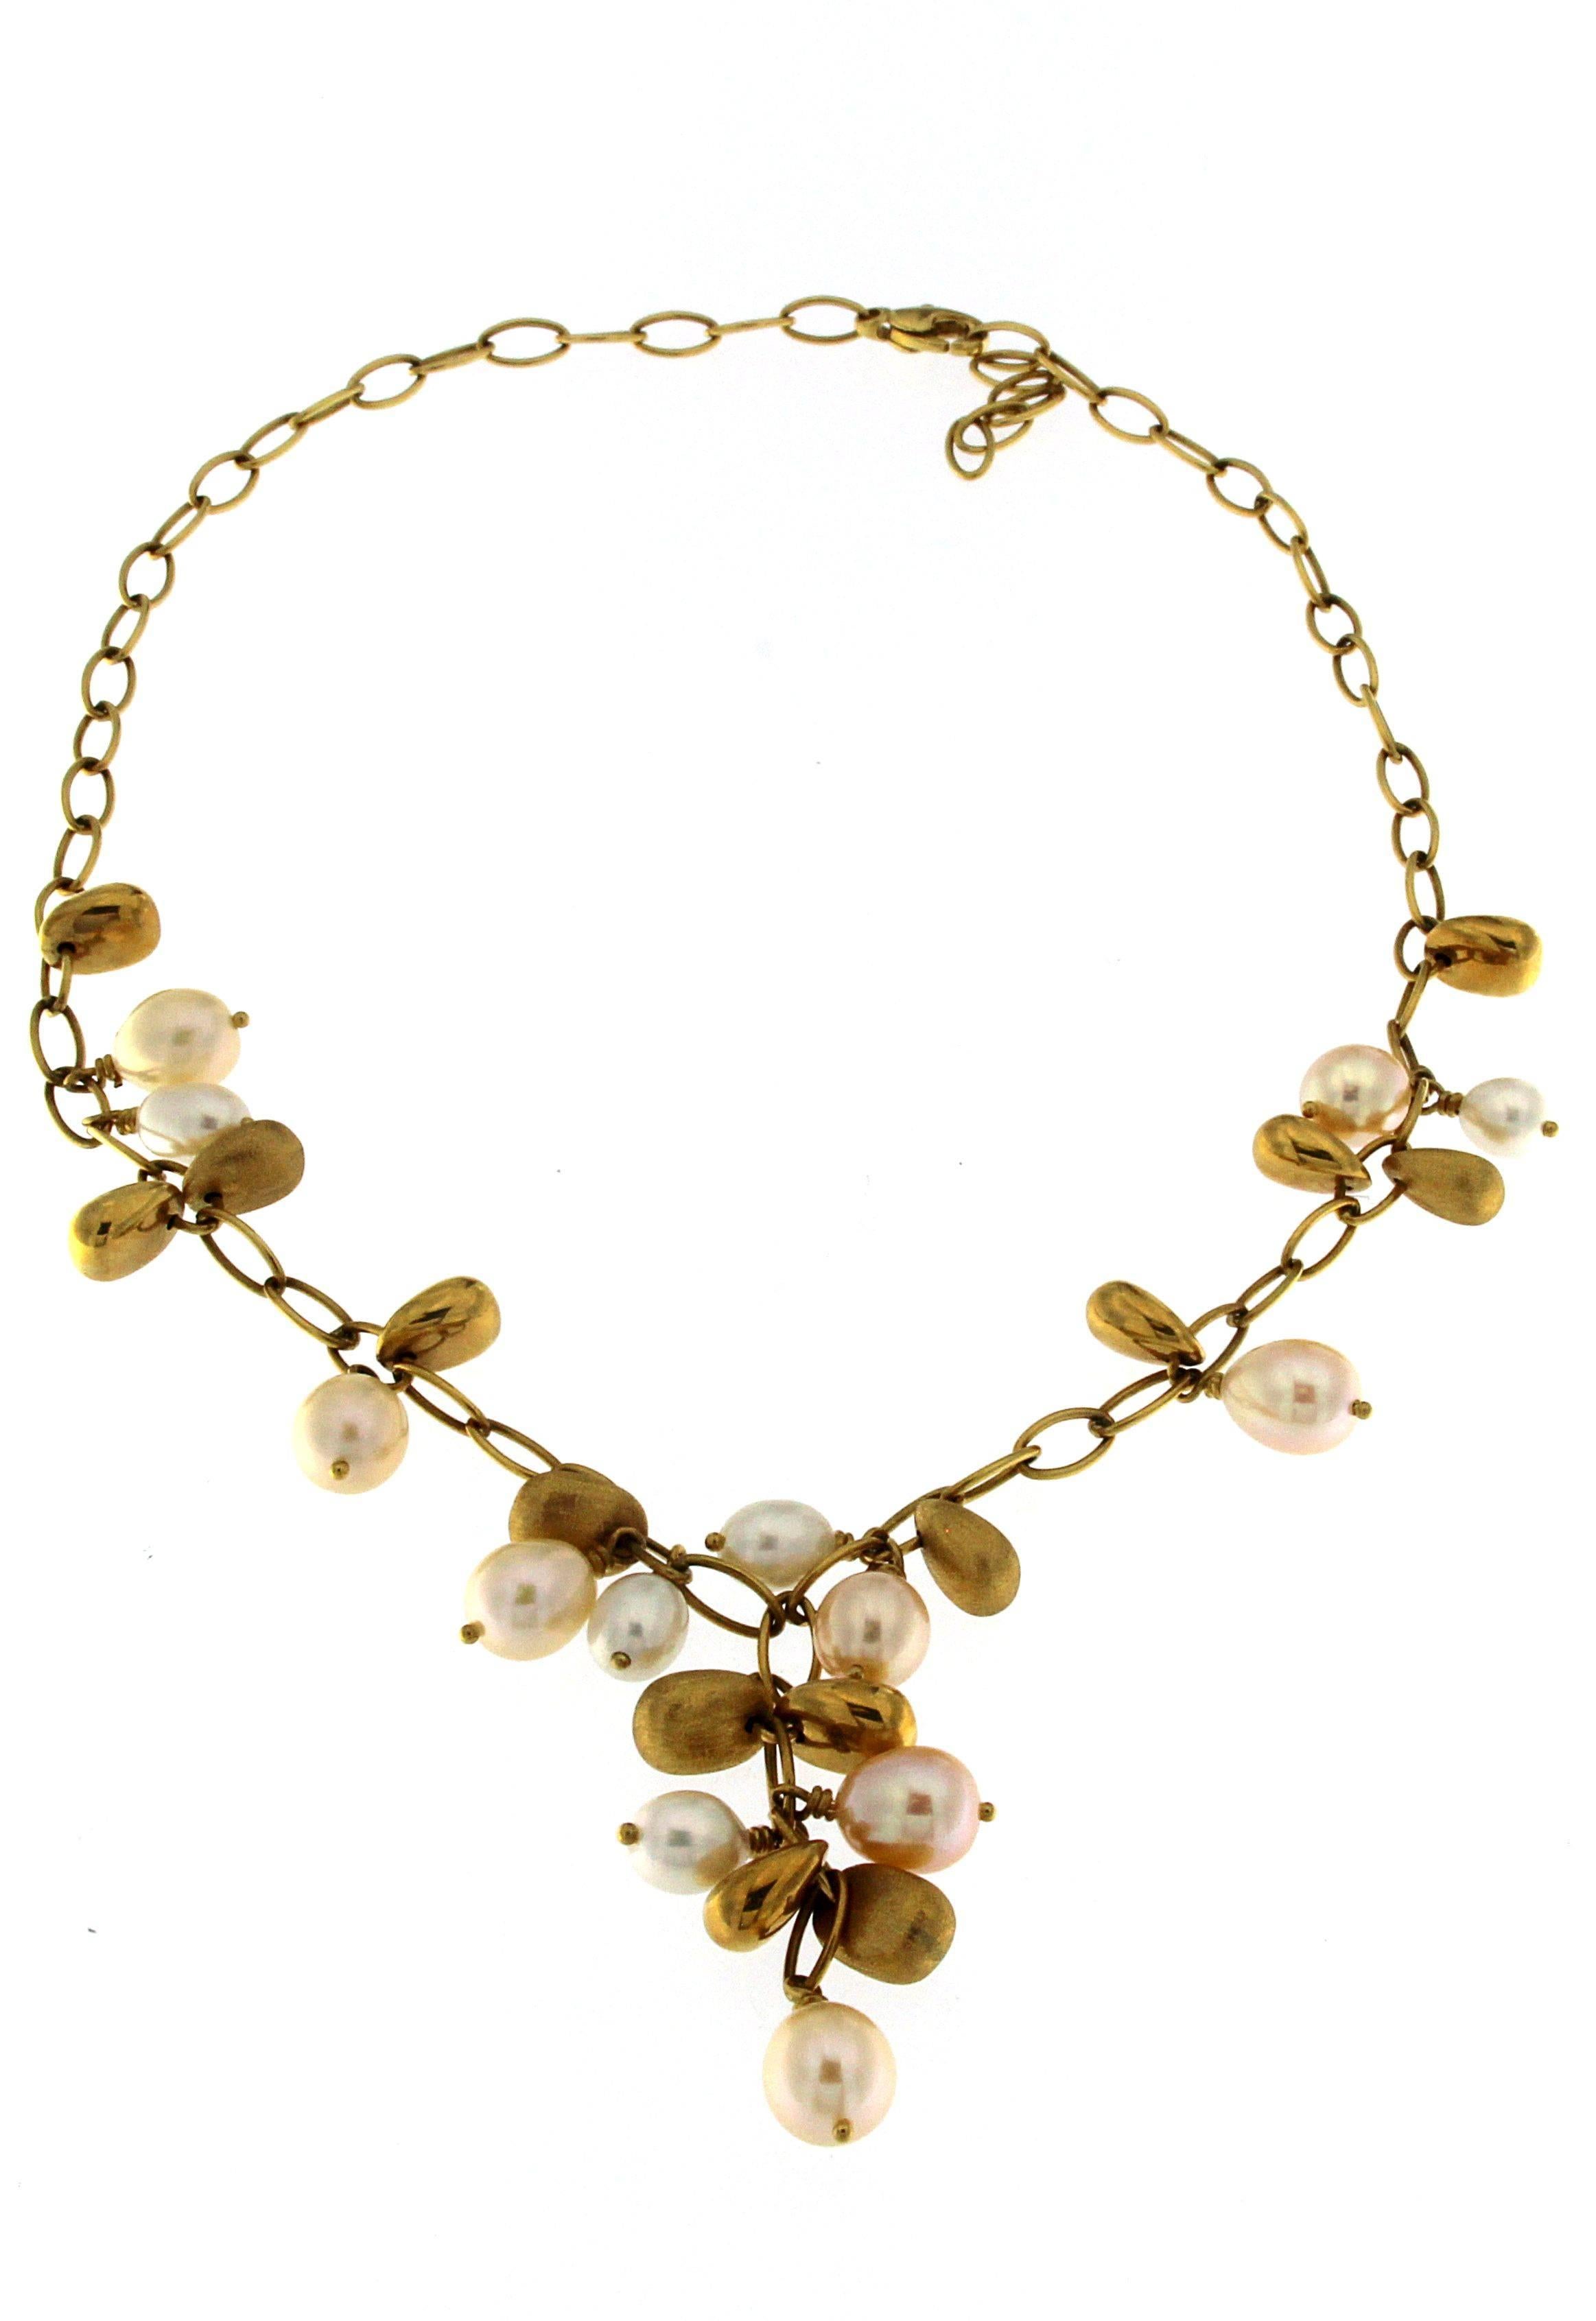 Necklace and fancy bracelet made with a classic chain enriched with shiny and satiny pebbles and river Pearls in the various shades of white and rosé
Total lost gold 42.30 -  gr 25.50 for the necklace and gr 16.80 for the bracelet 
Total length or